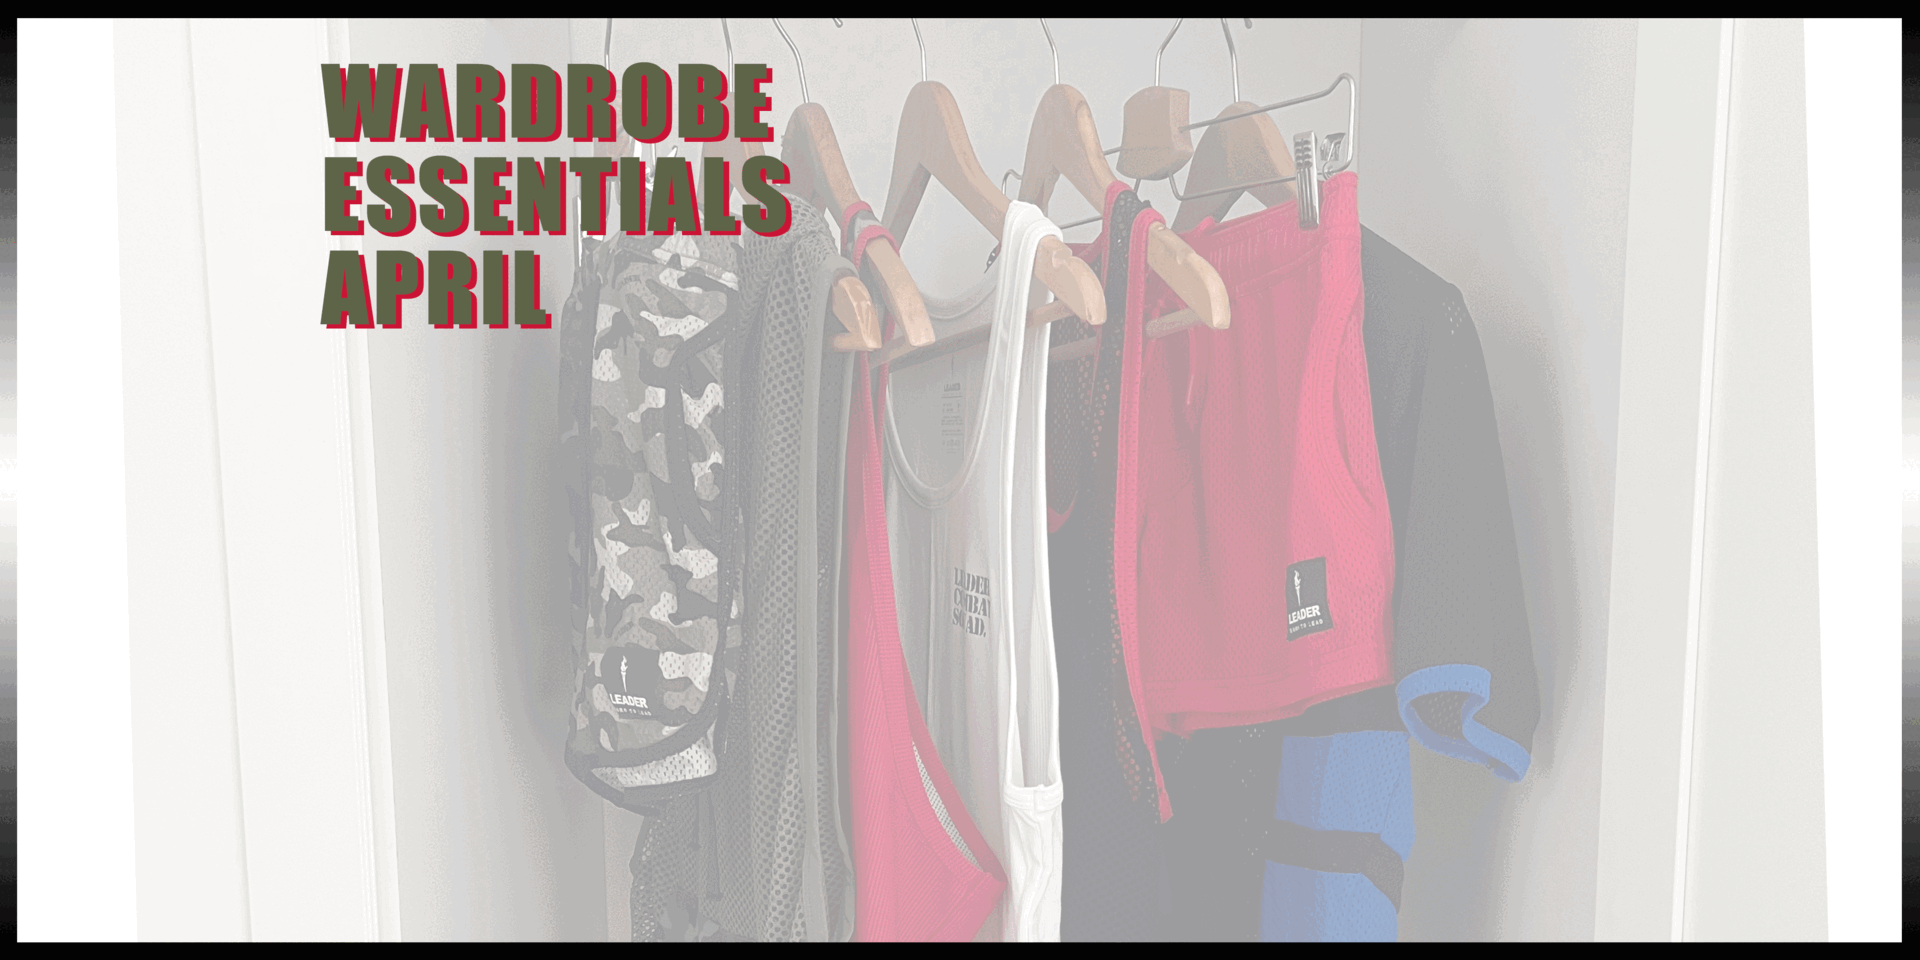 30% Off our Wardrobe Essentials Offer - Camo Print Racer Tank Top Red, G.I Booty Mesh Shorts Khaki & G.I Classic Red Thong